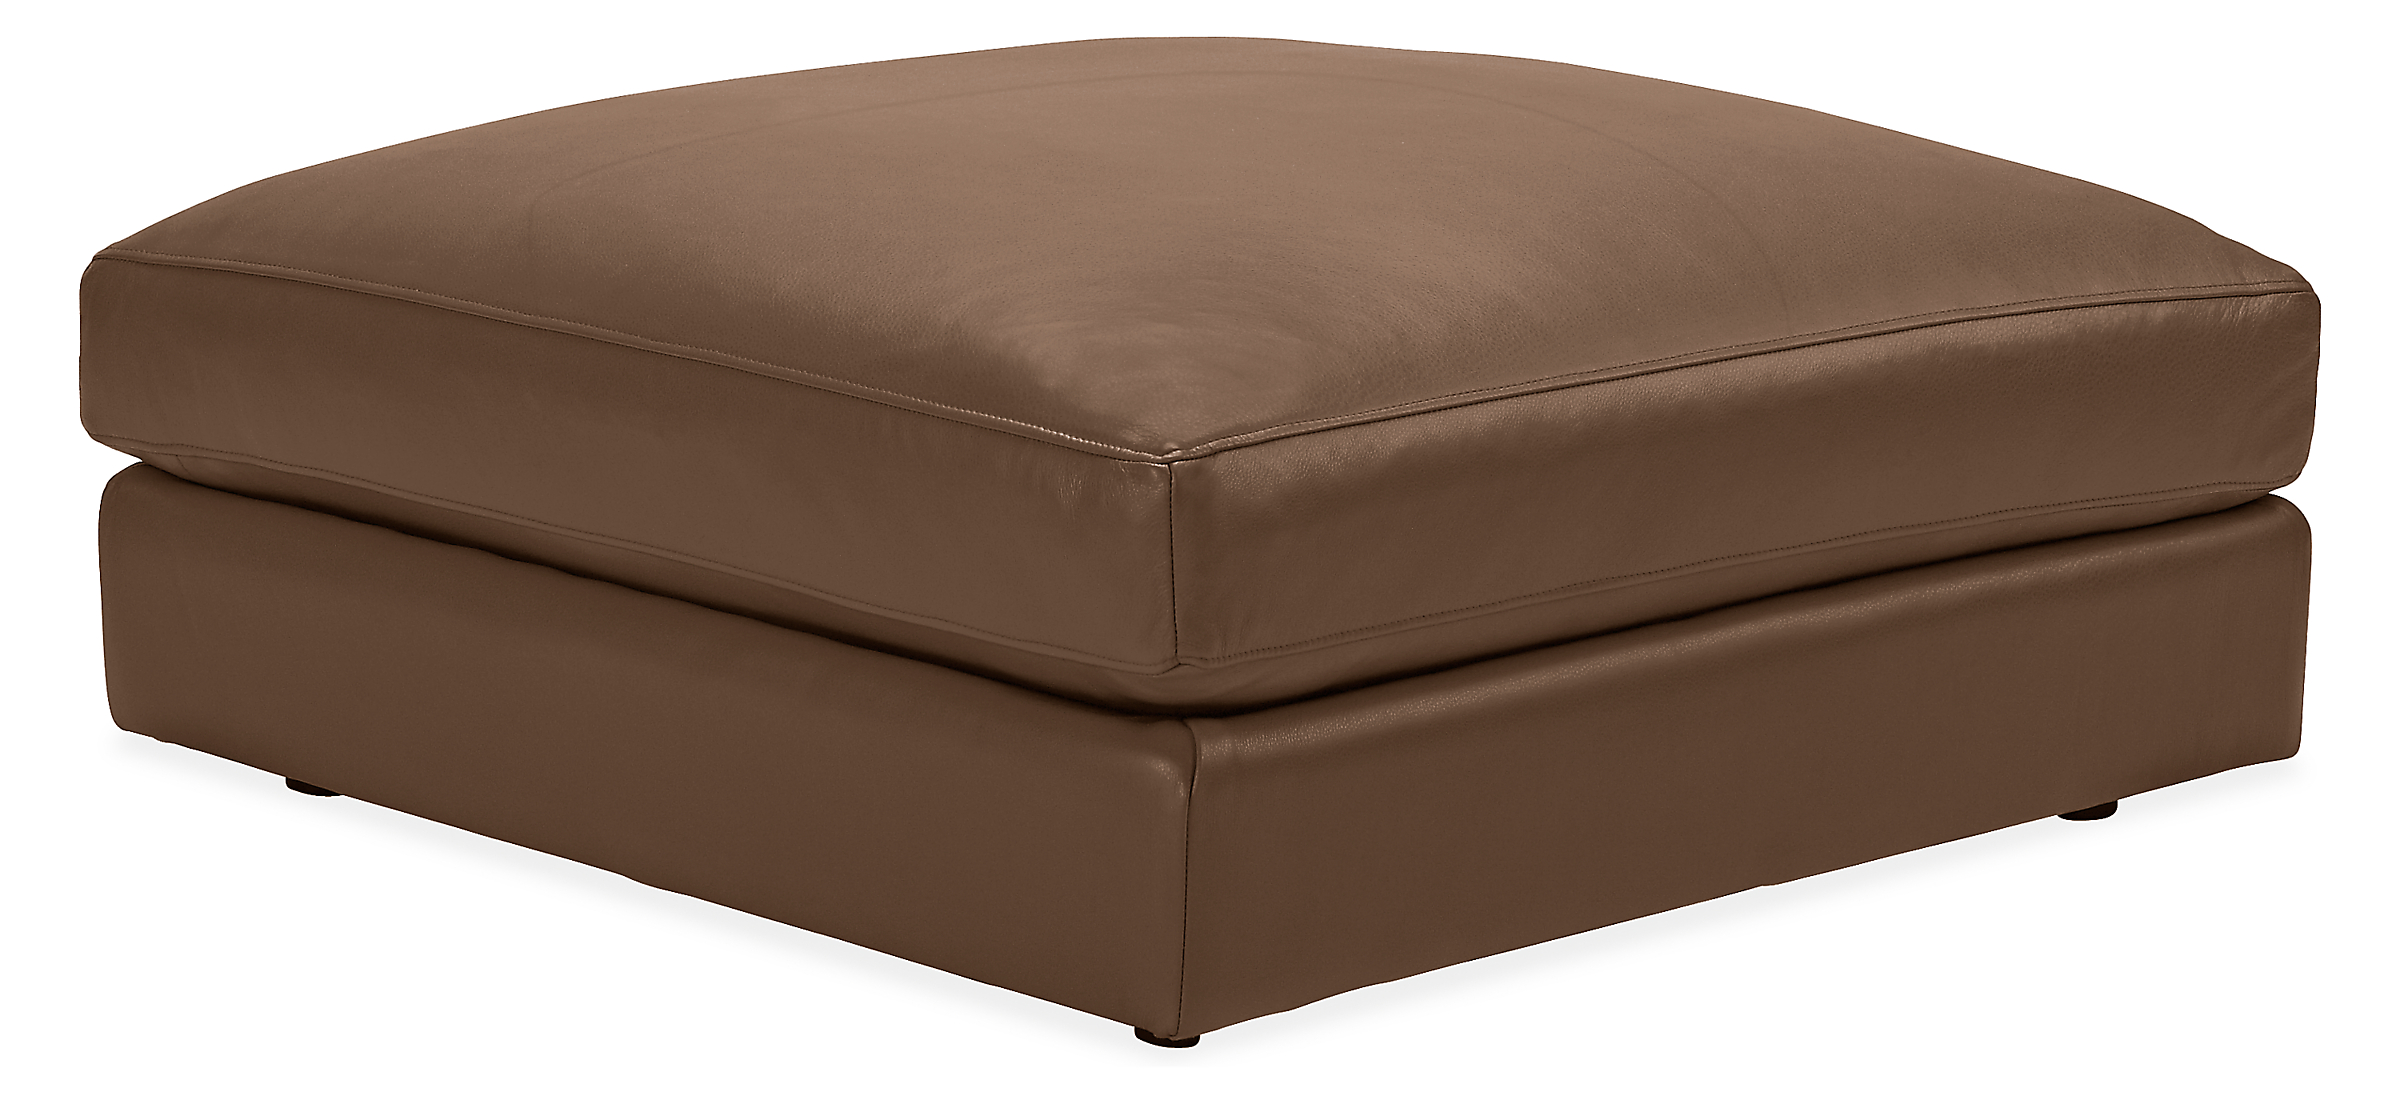 Linger 37w 37d 17h Square Ottoman in Vento Pewter Leather